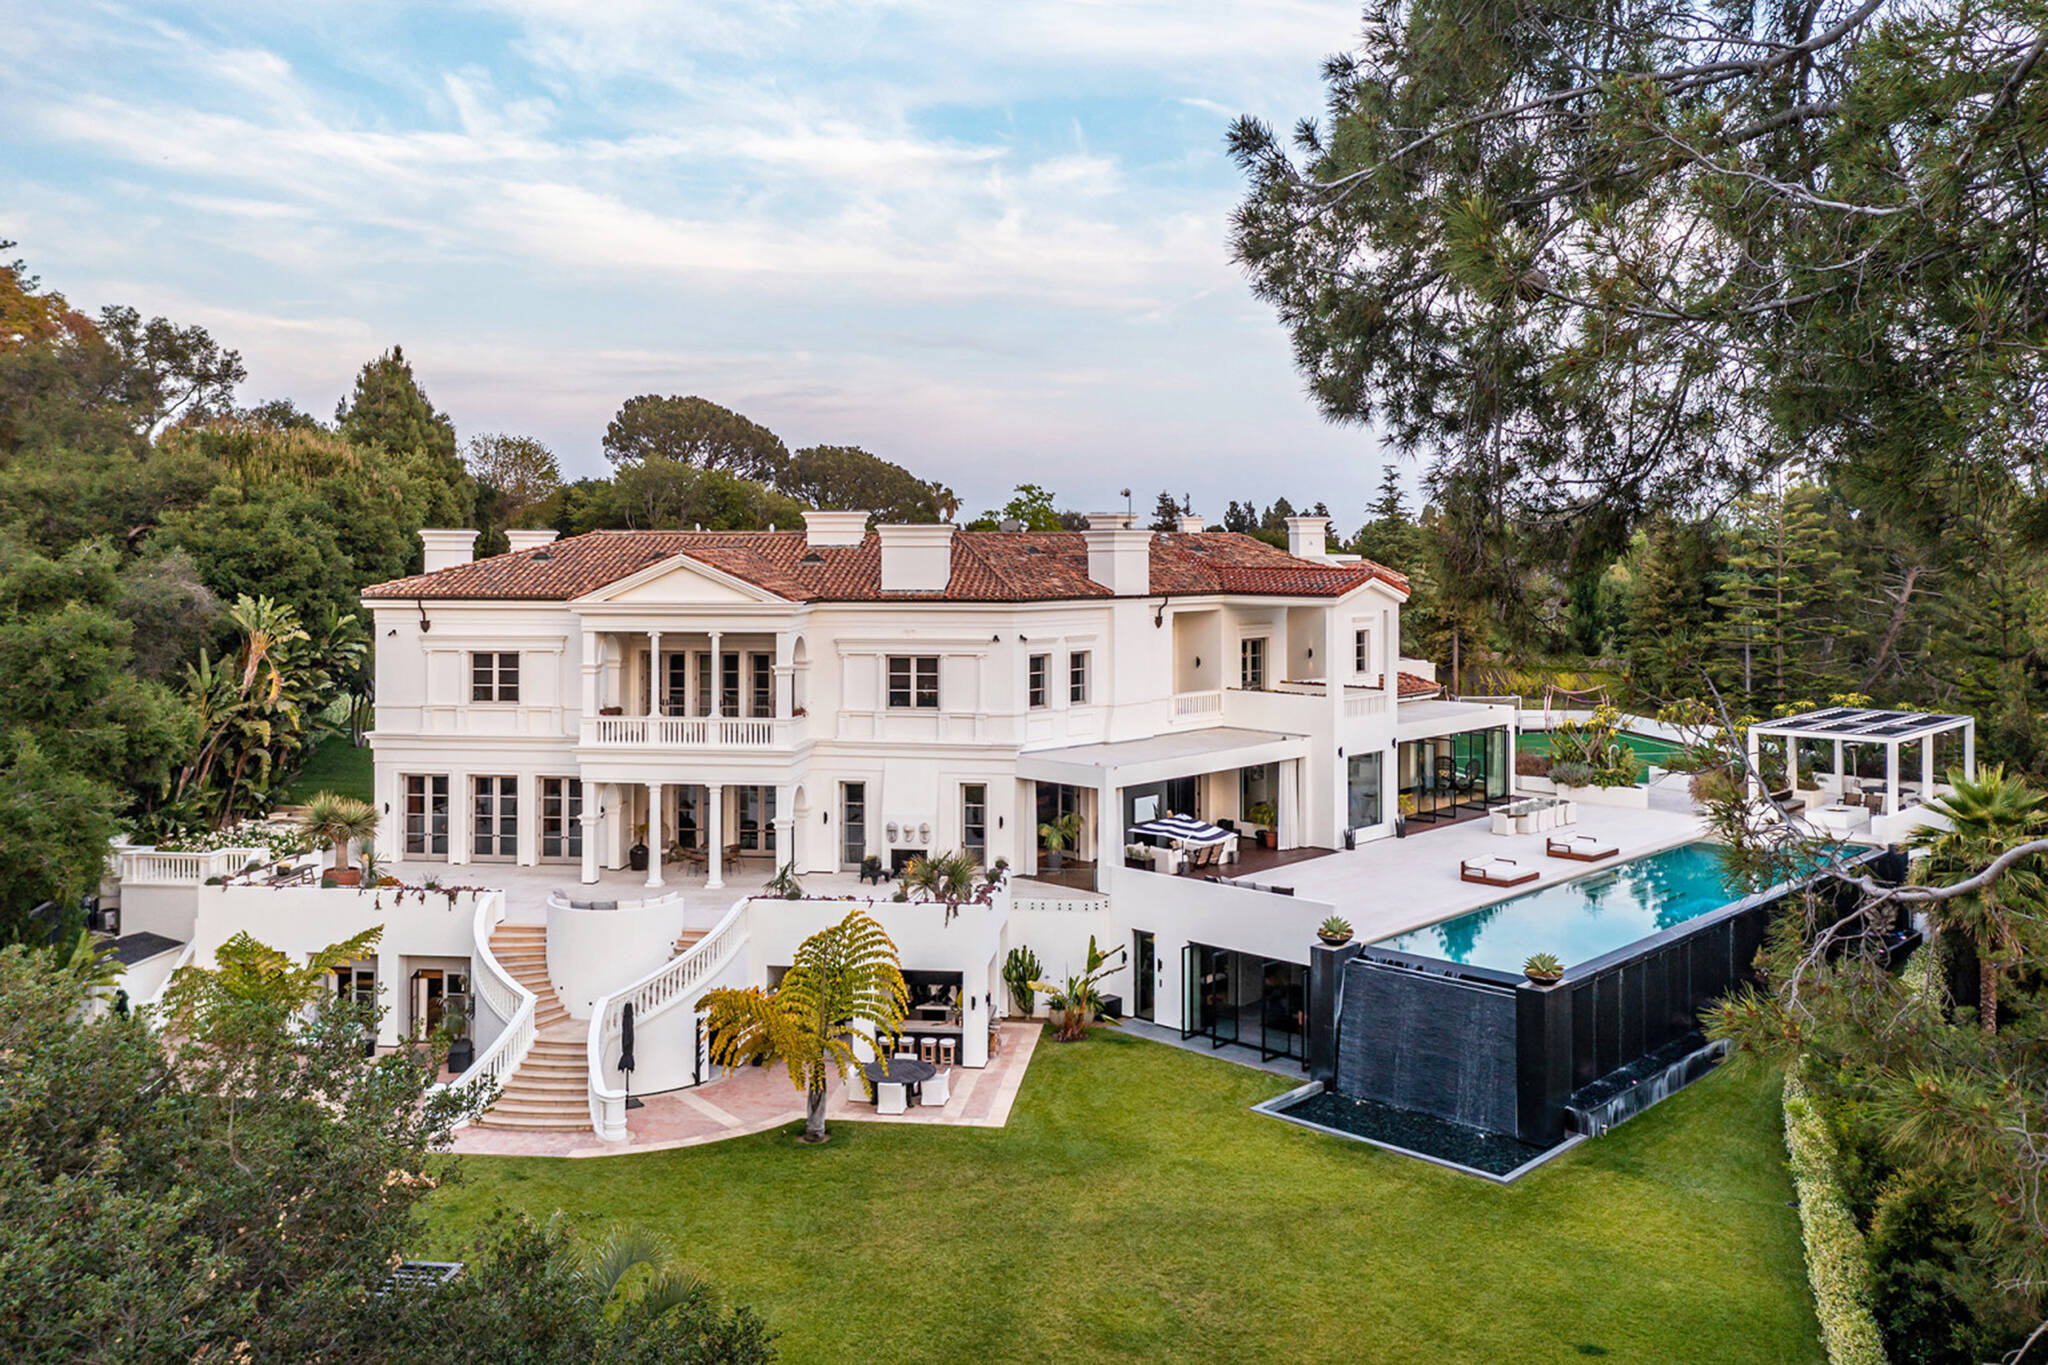 The Weeknd just bought a $70 million mansion and here's what it looks like